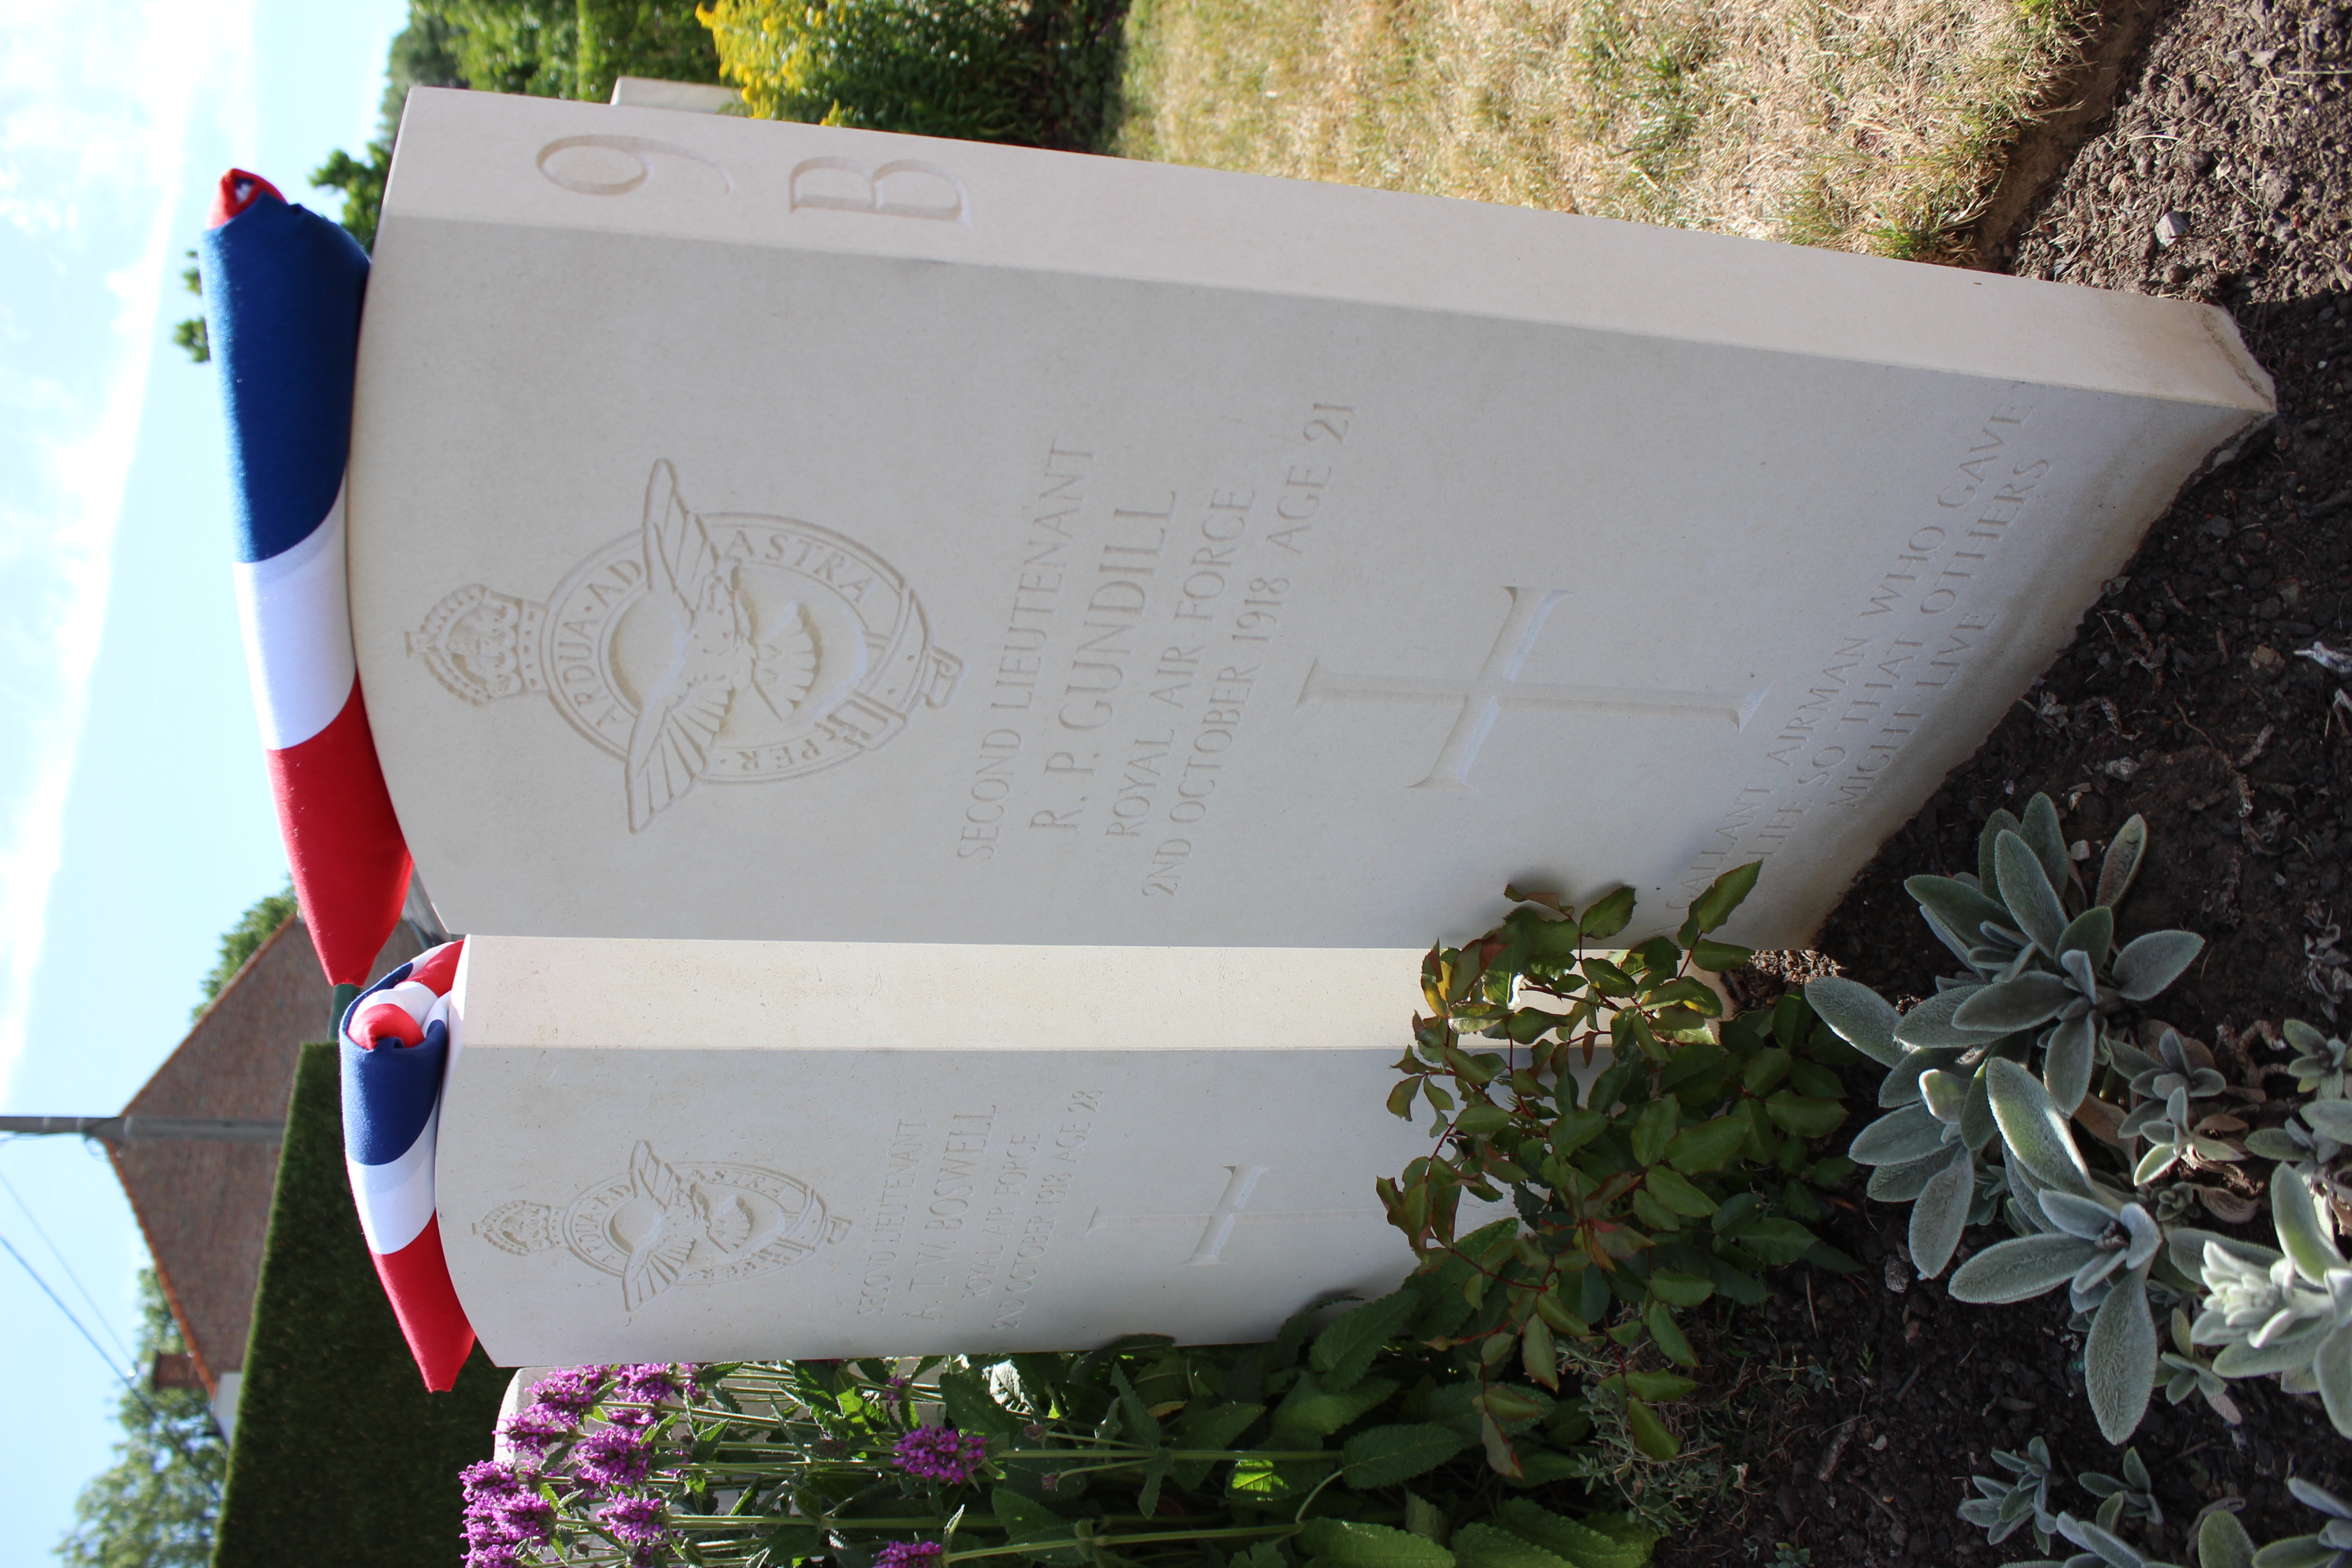 Headstones with flowers and union jack flags.